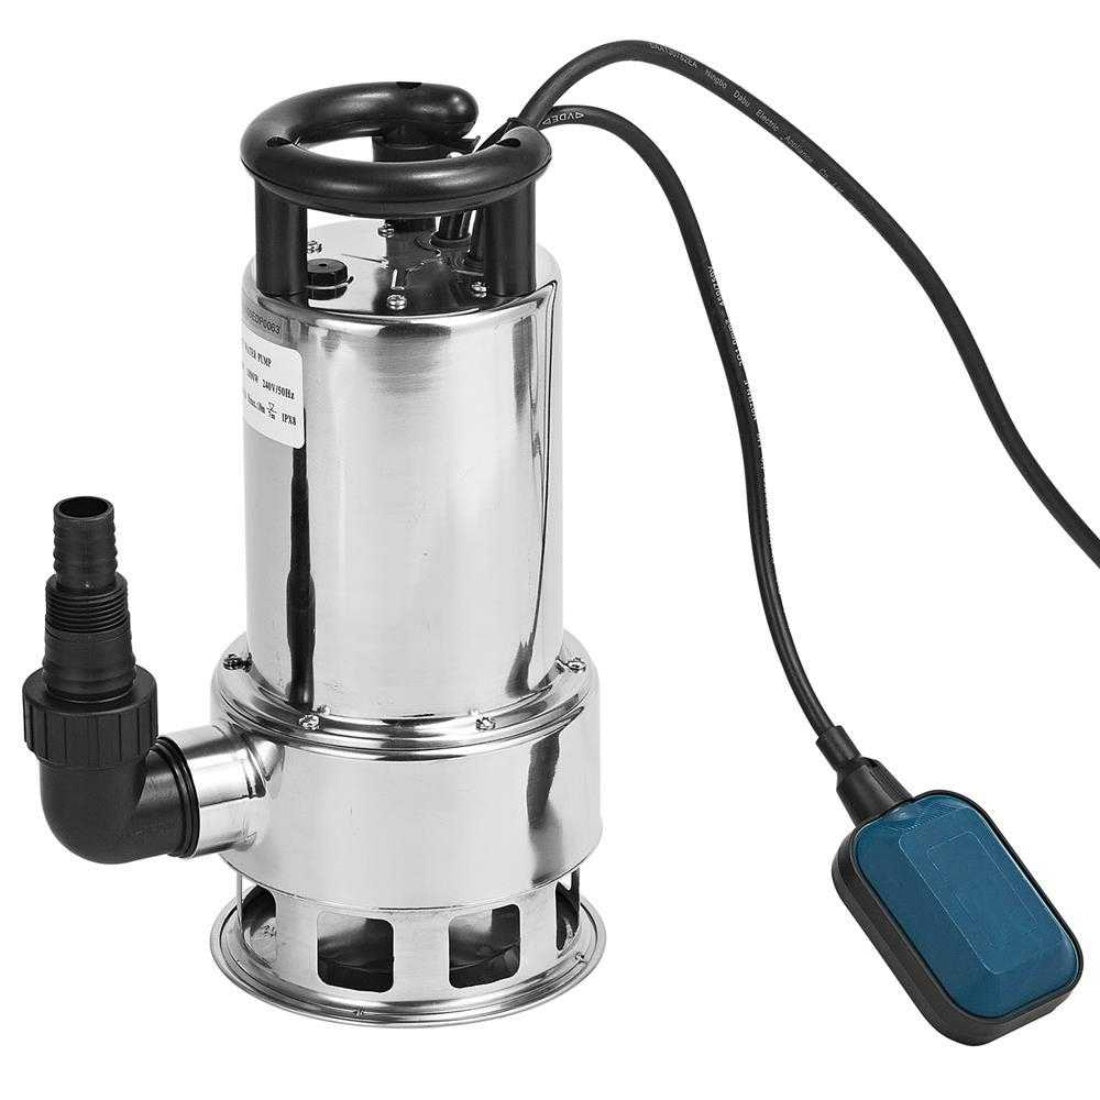 1800W Stainless Steel Submersible Dirty Water Pump